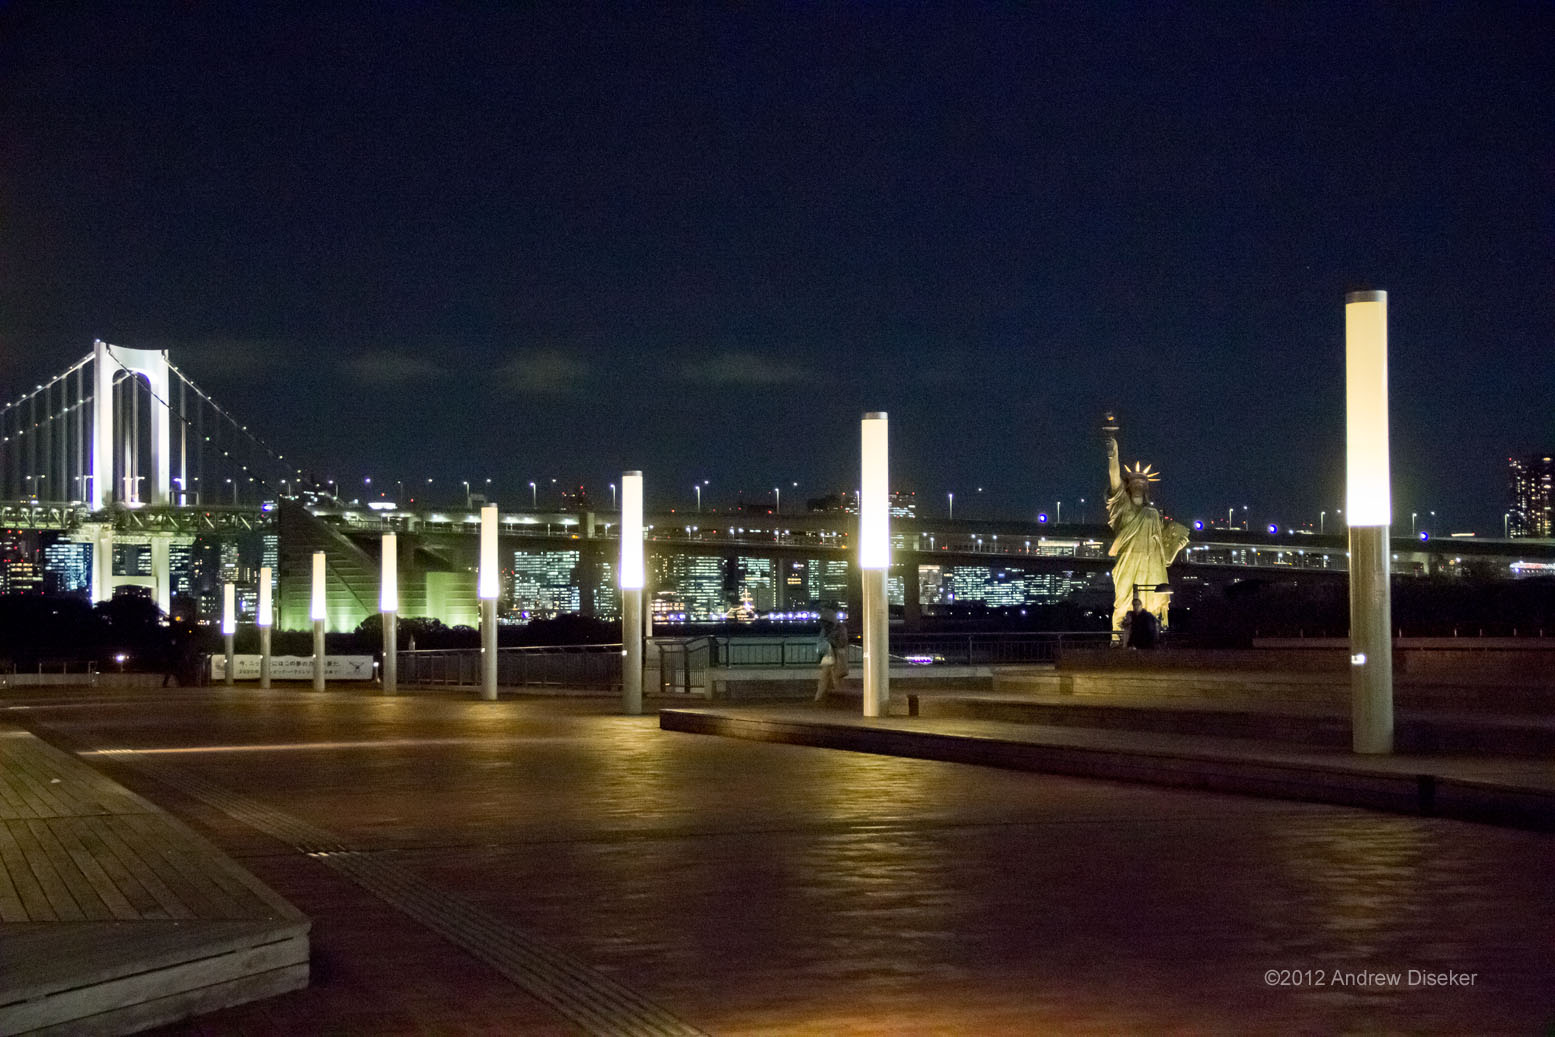 view from Odaiba, with a shot of their model of "Liberty", and a nice shot of the Rainbow Bridge